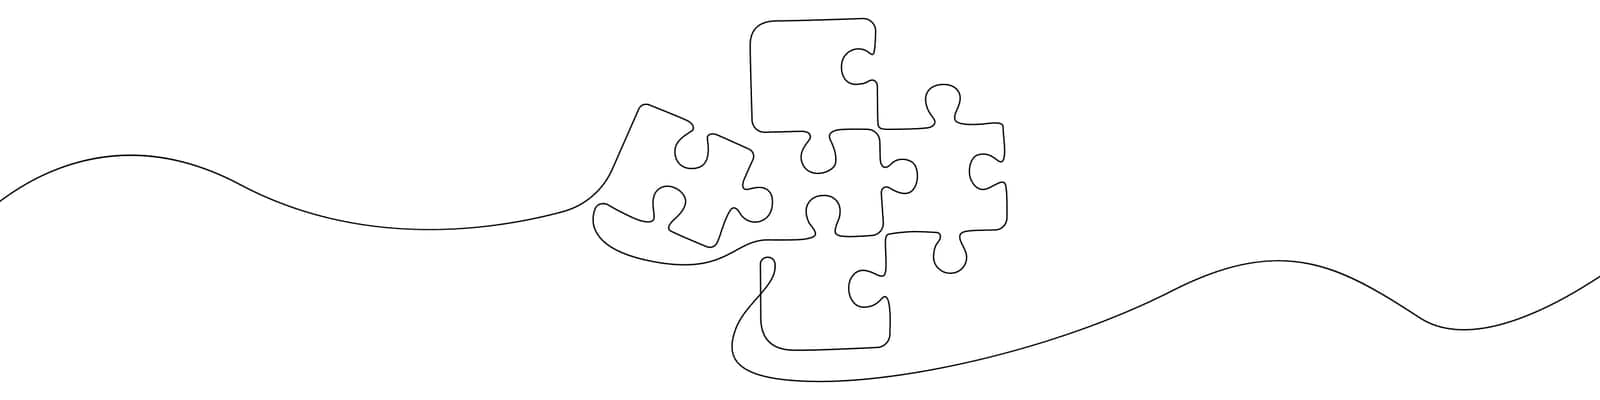 Puzzle icon line continuous drawing vector. One line Conundrum icon vector background. Team work icon. Continuous outline of a Missing item. by Moreidea